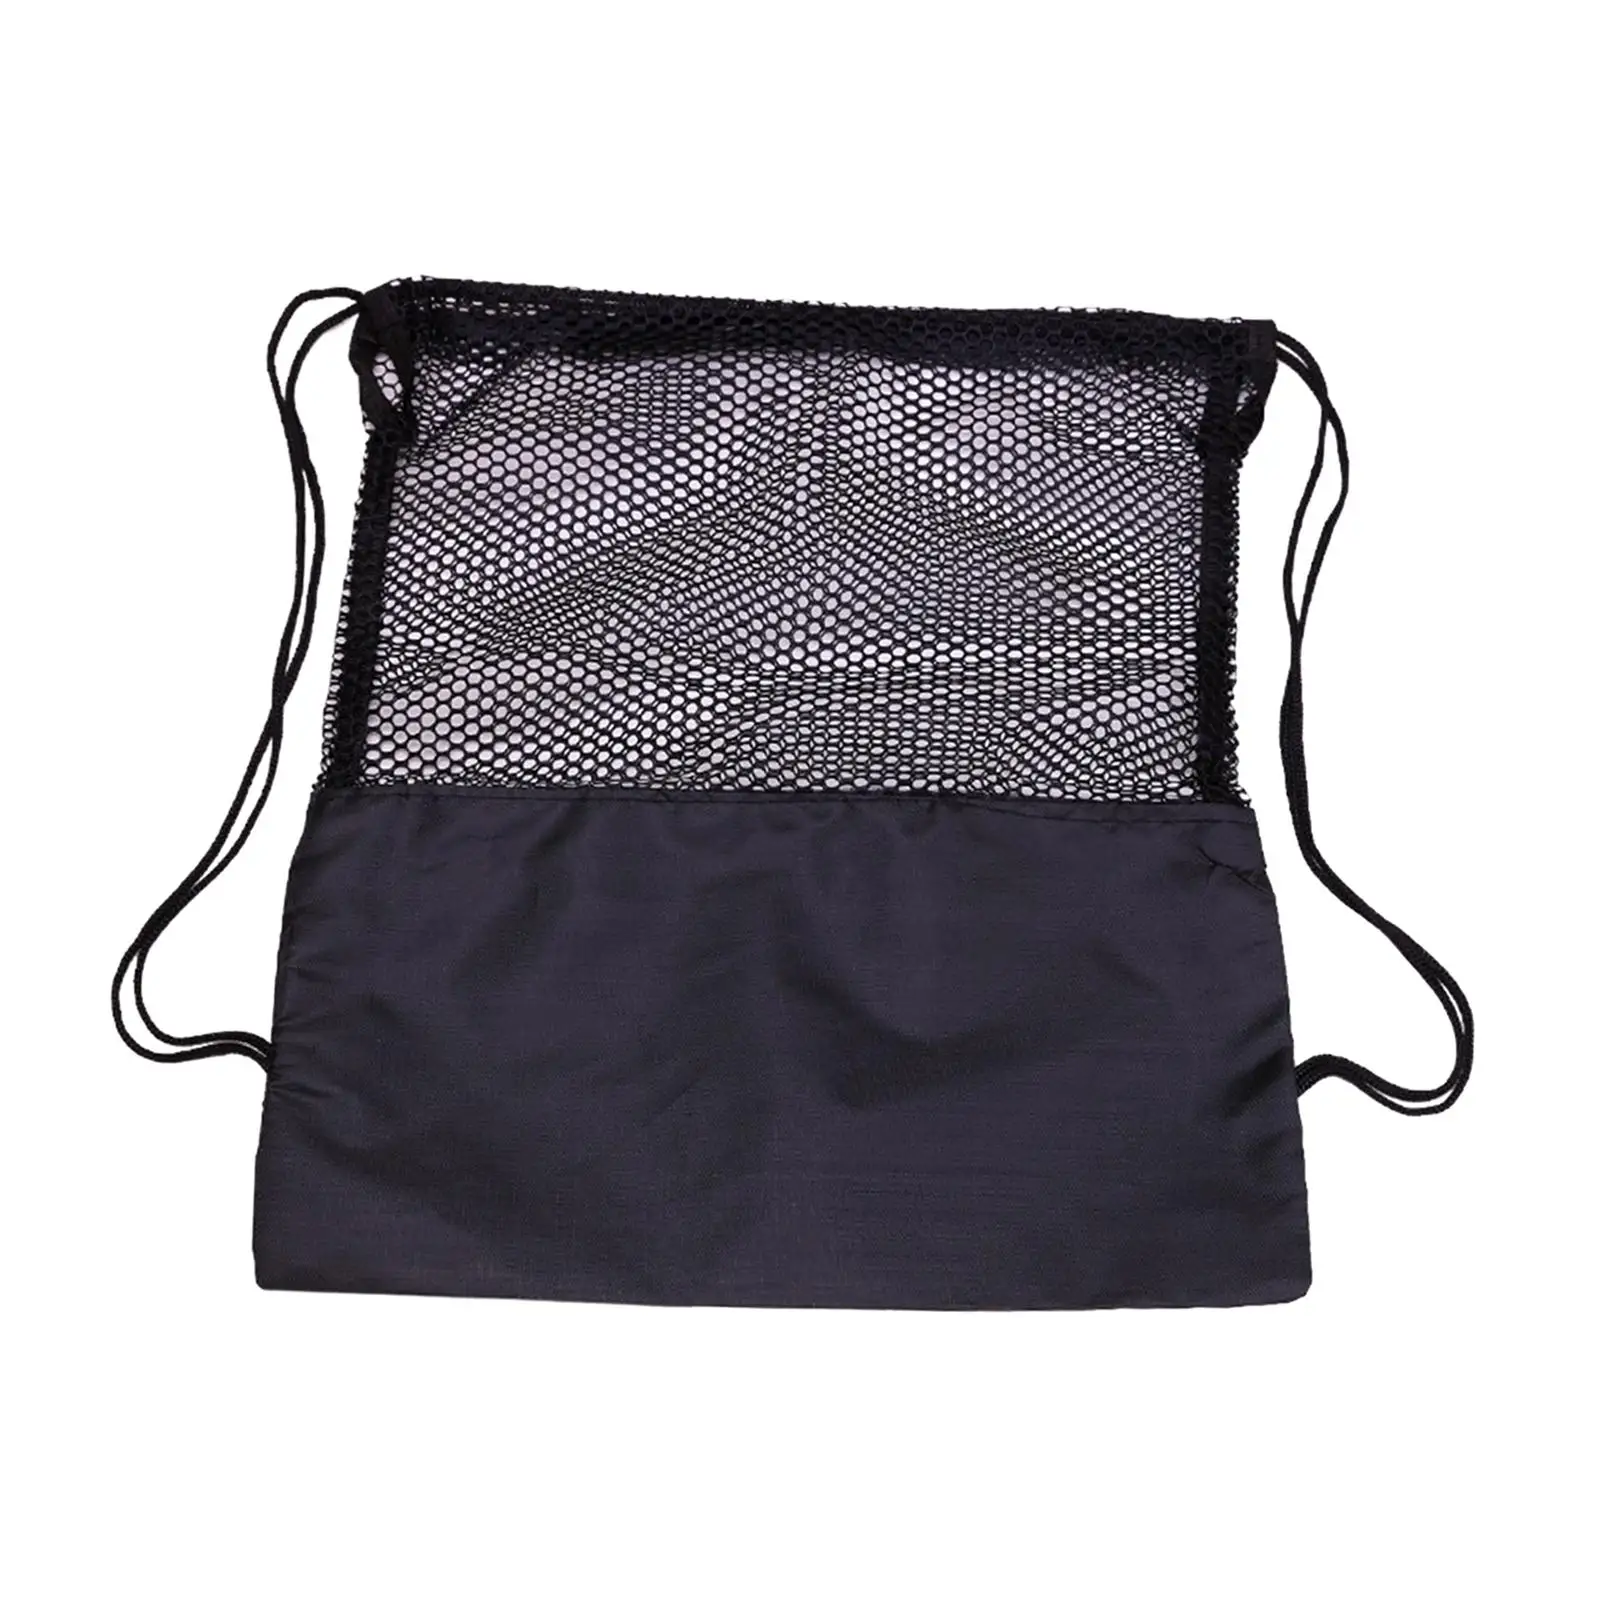 Basketball Shoulder Bag Durable Professional Casual Day Pack Drawstring Backpack for Swimming Volleyball Football Dance Travel